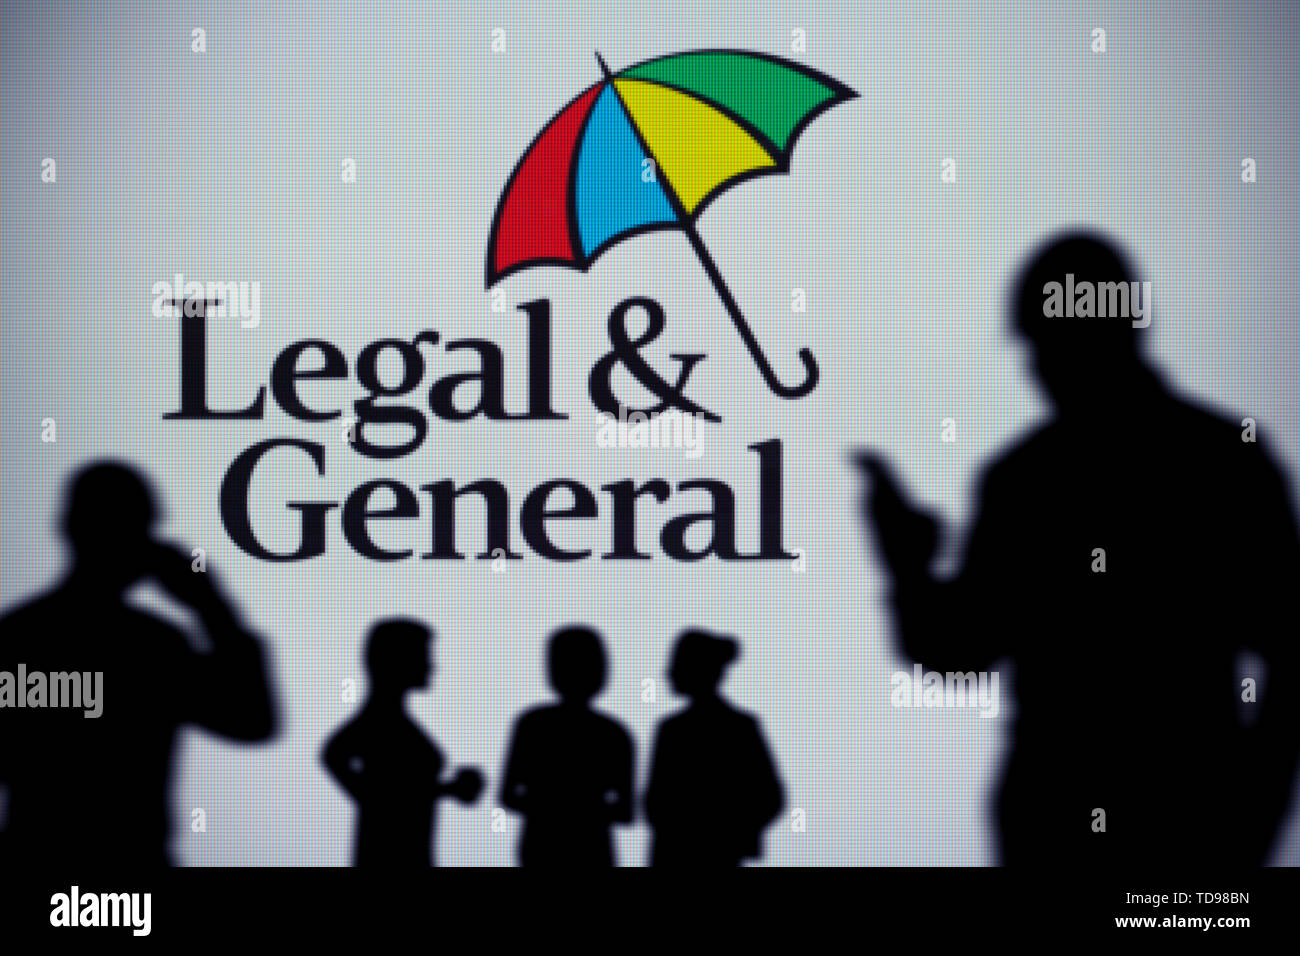 The Legal and General logo is seen on an LED screen in the background while a silhouetted person uses a smartphone (Editorial use only). Stock Photo